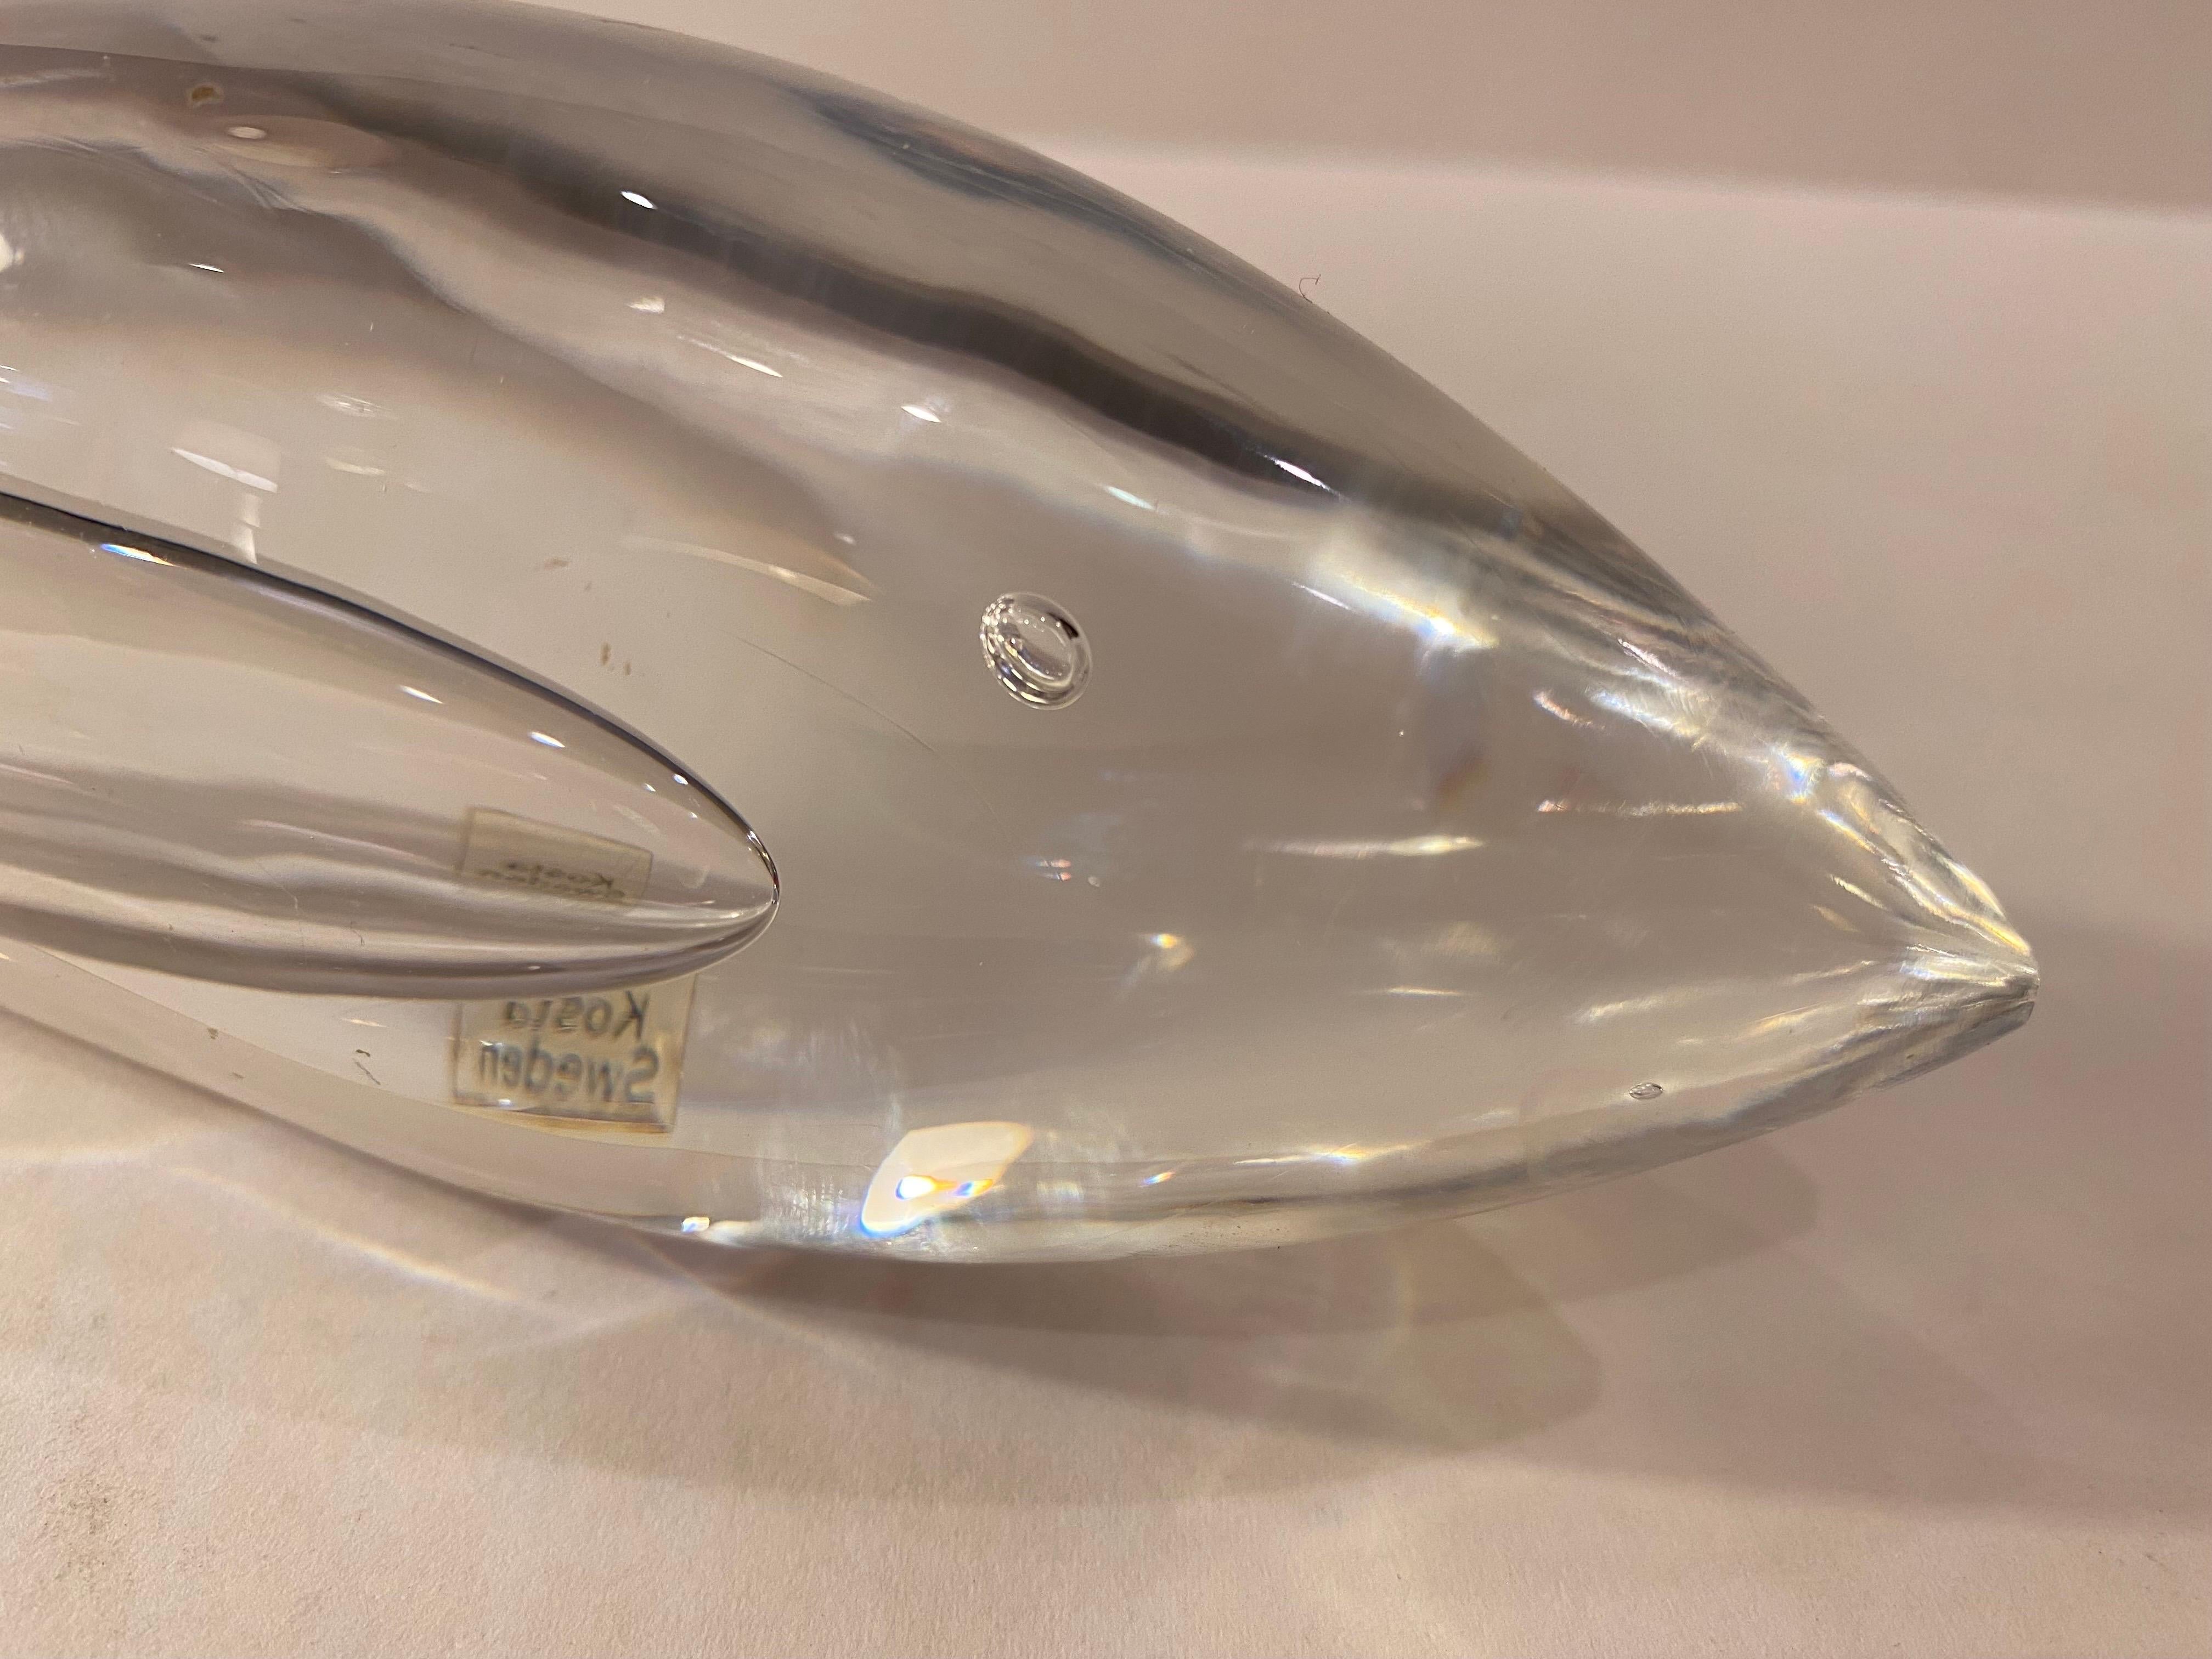 Kosta Boda of Sweden created a series of art glass animals. This particular piece is a whale and was created and designed by Vicke Lindstrand who worked for Kosta Boda from 1950-73. There is an air bubble neatly placed to represent an eye and